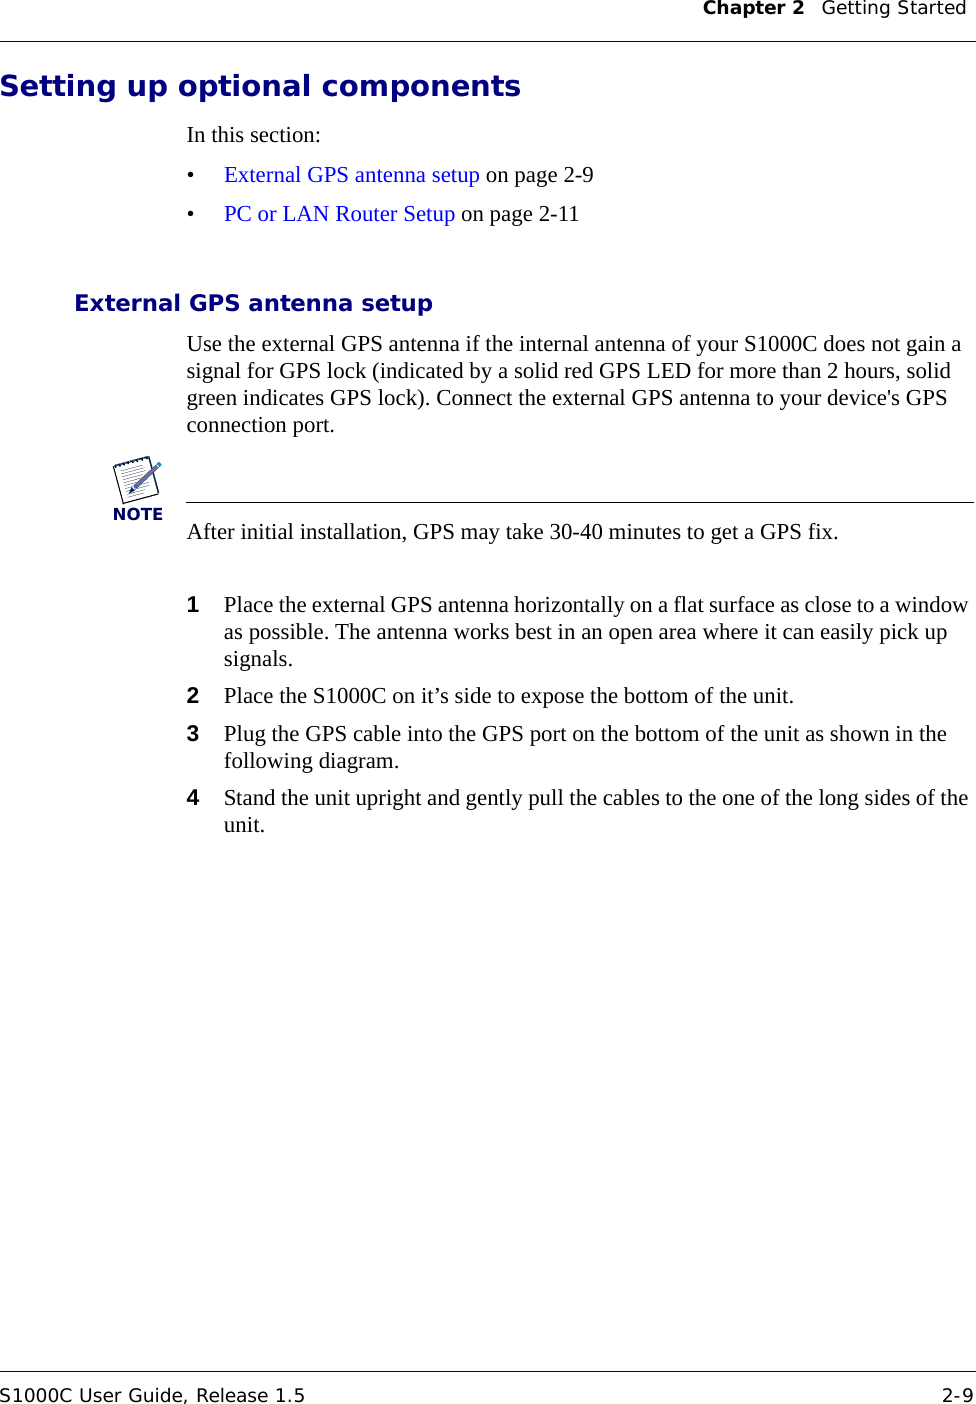 Chapter 2    Getting Started S1000C User Guide, Release 1.5 2-9DRAFTSetting up optional componentsIn this section:•External GPS antenna setup on page 2-9•PC or LAN Router Setup on page 2-11External GPS antenna setupUse the external GPS antenna if the internal antenna of your S1000C does not gain a signal for GPS lock (indicated by a solid red GPS LED for more than 2 hours, solid green indicates GPS lock). Connect the external GPS antenna to your device&apos;s GPS connection port.NOTEAfter initial installation, GPS may take 30-40 minutes to get a GPS fix.1Place the external GPS antenna horizontally on a flat surface as close to a window as possible. The antenna works best in an open area where it can easily pick up signals. 2Place the S1000C on it’s side to expose the bottom of the unit. 3Plug the GPS cable into the GPS port on the bottom of the unit as shown in the following diagram.4Stand the unit upright and gently pull the cables to the one of the long sides of the unit.